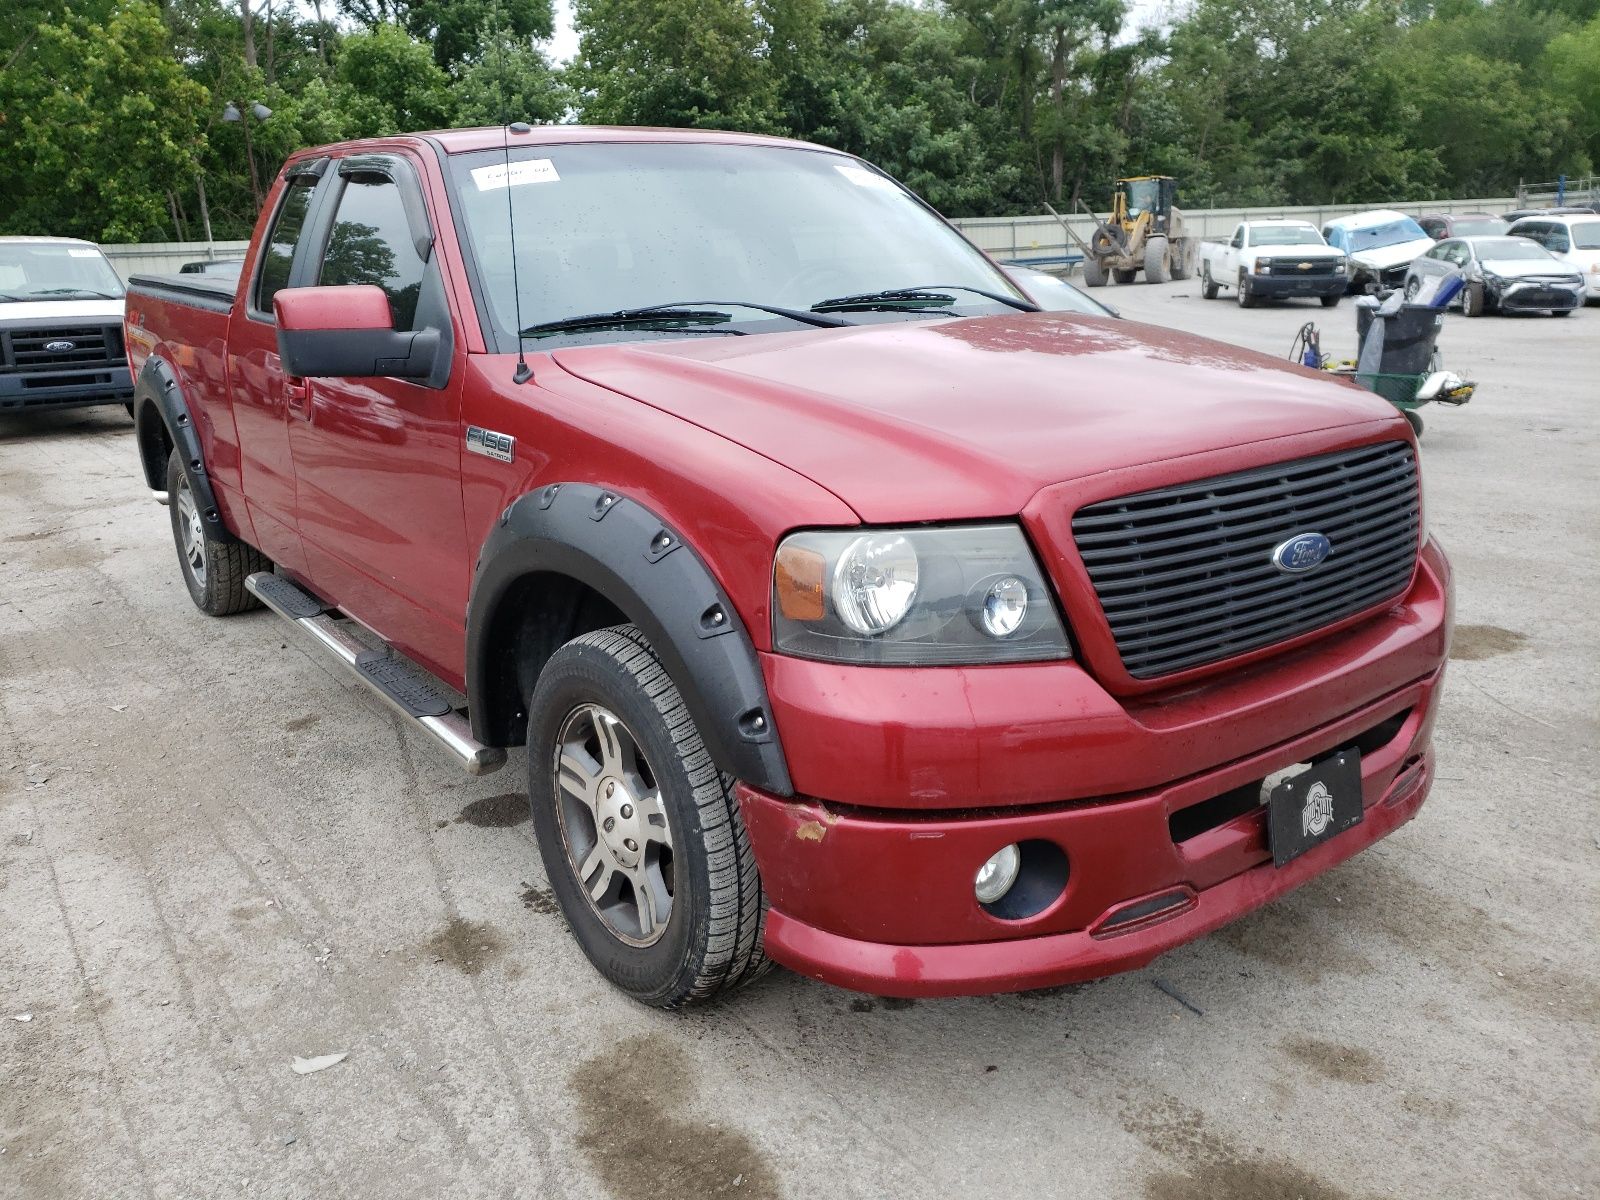 1 of 1FTPX12V17KB62968 Ford F-Series 2007